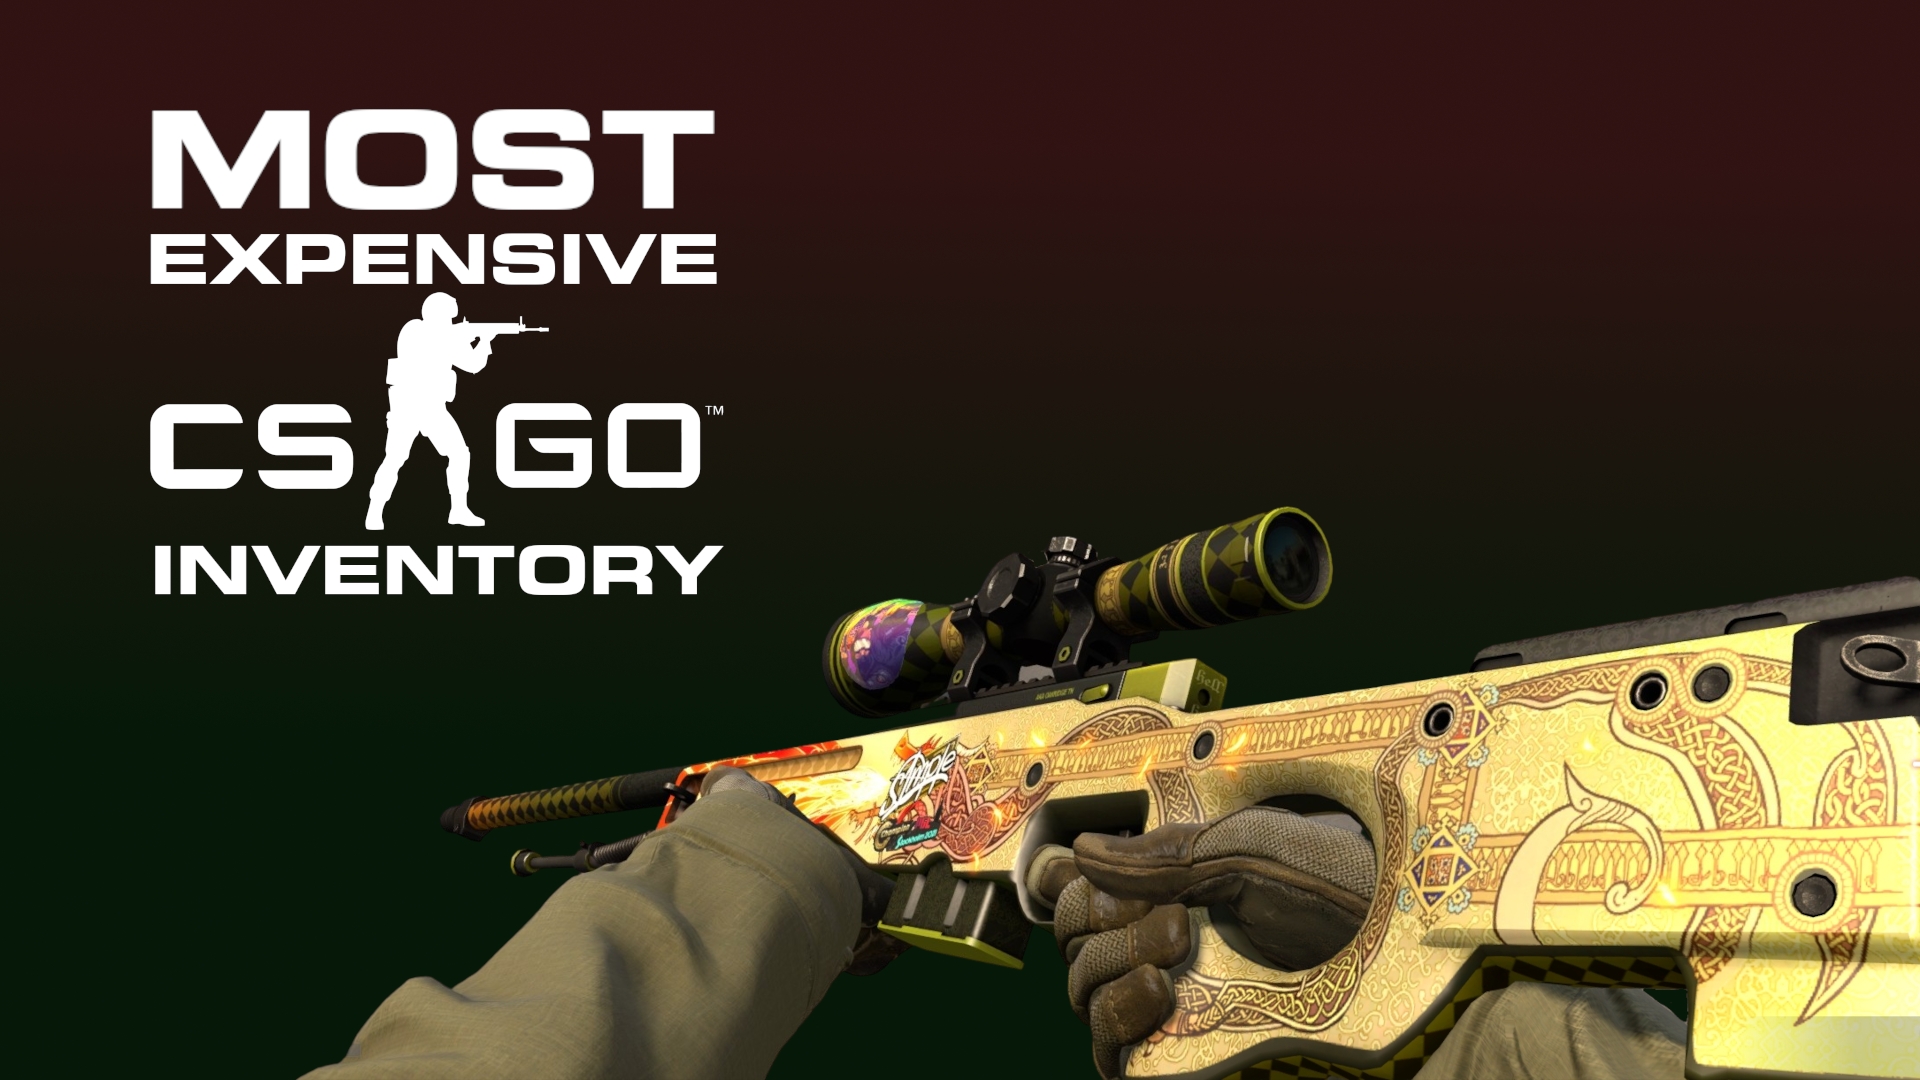 Who has the most expensive CSGO inventory?